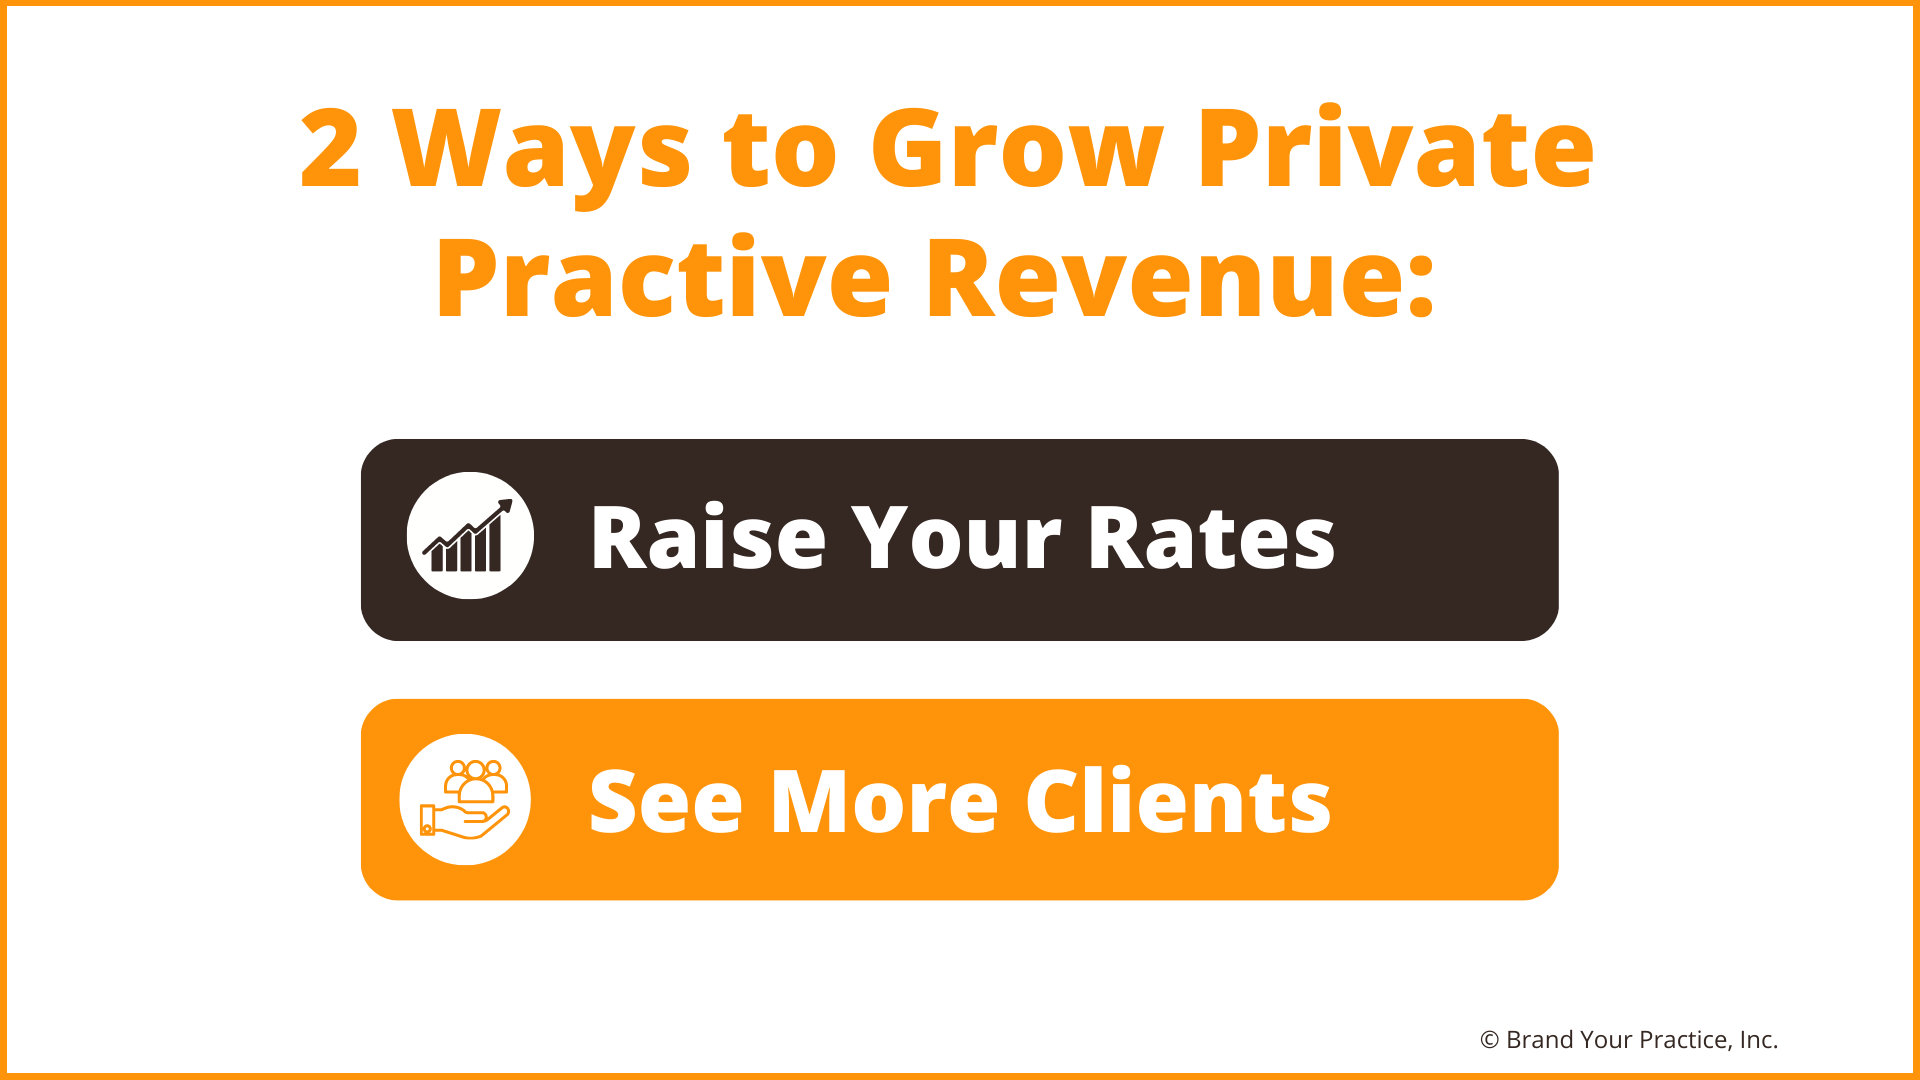 2 Ways to Grow Private Practice Revenue:<br /> 1. Raise Your Rates<br /> 2. See More Clients